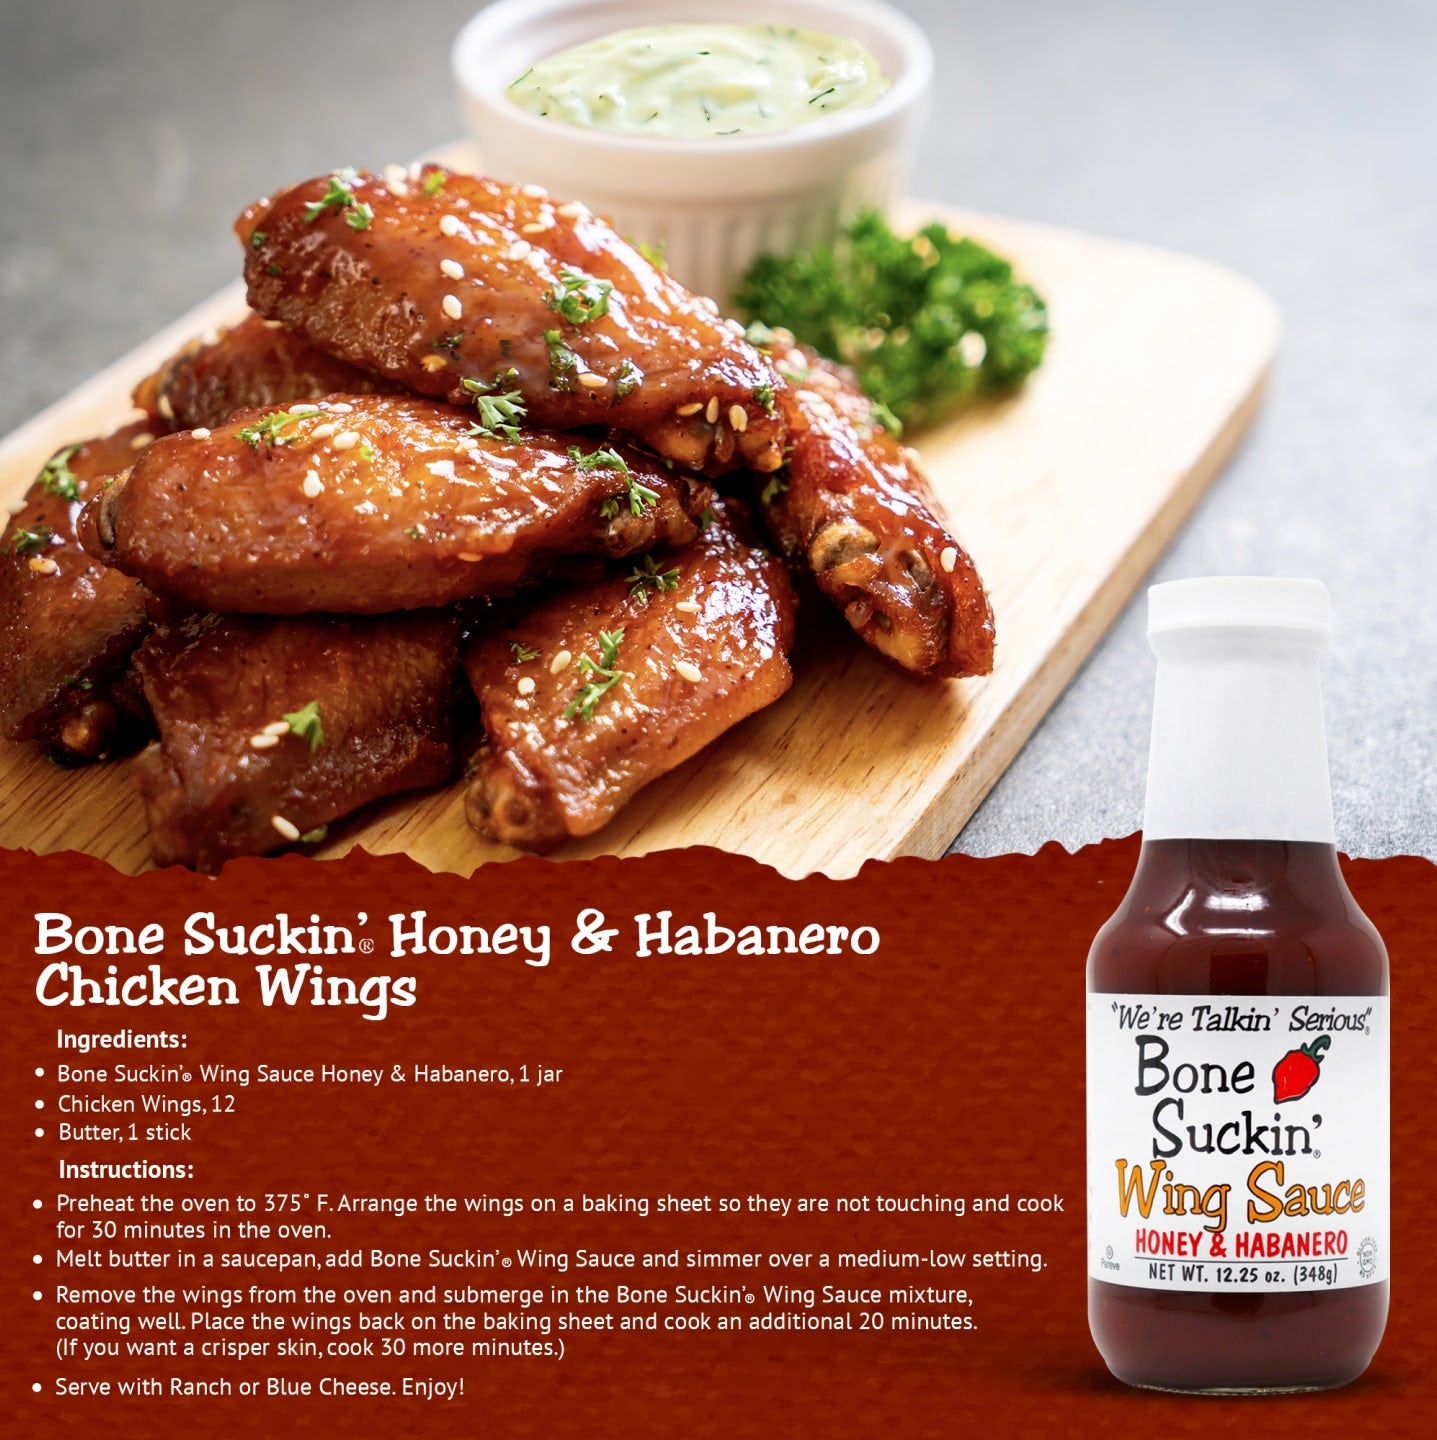 Bone Suckin' Honey & Habanero Chicken Wings Recipe. Ingredients: Bone Suckin' Wing Sauce Honey&Habanero. 12 Chicken wings. 1 stick butter. Instructions: Preheat oven to 375F. Arrange wings on baking sheet so they are not touching. Cook for 30 minutes in oven. Melt butter in a saucepan, add Bone Suckin' Wing Sauce and simmer over a medium-low setting. Remove wings from oven and submerge in the Bone Suckin' Wing Sauce mixture, coating well. Place back on baking sheet and cook an additional 20 minutes.